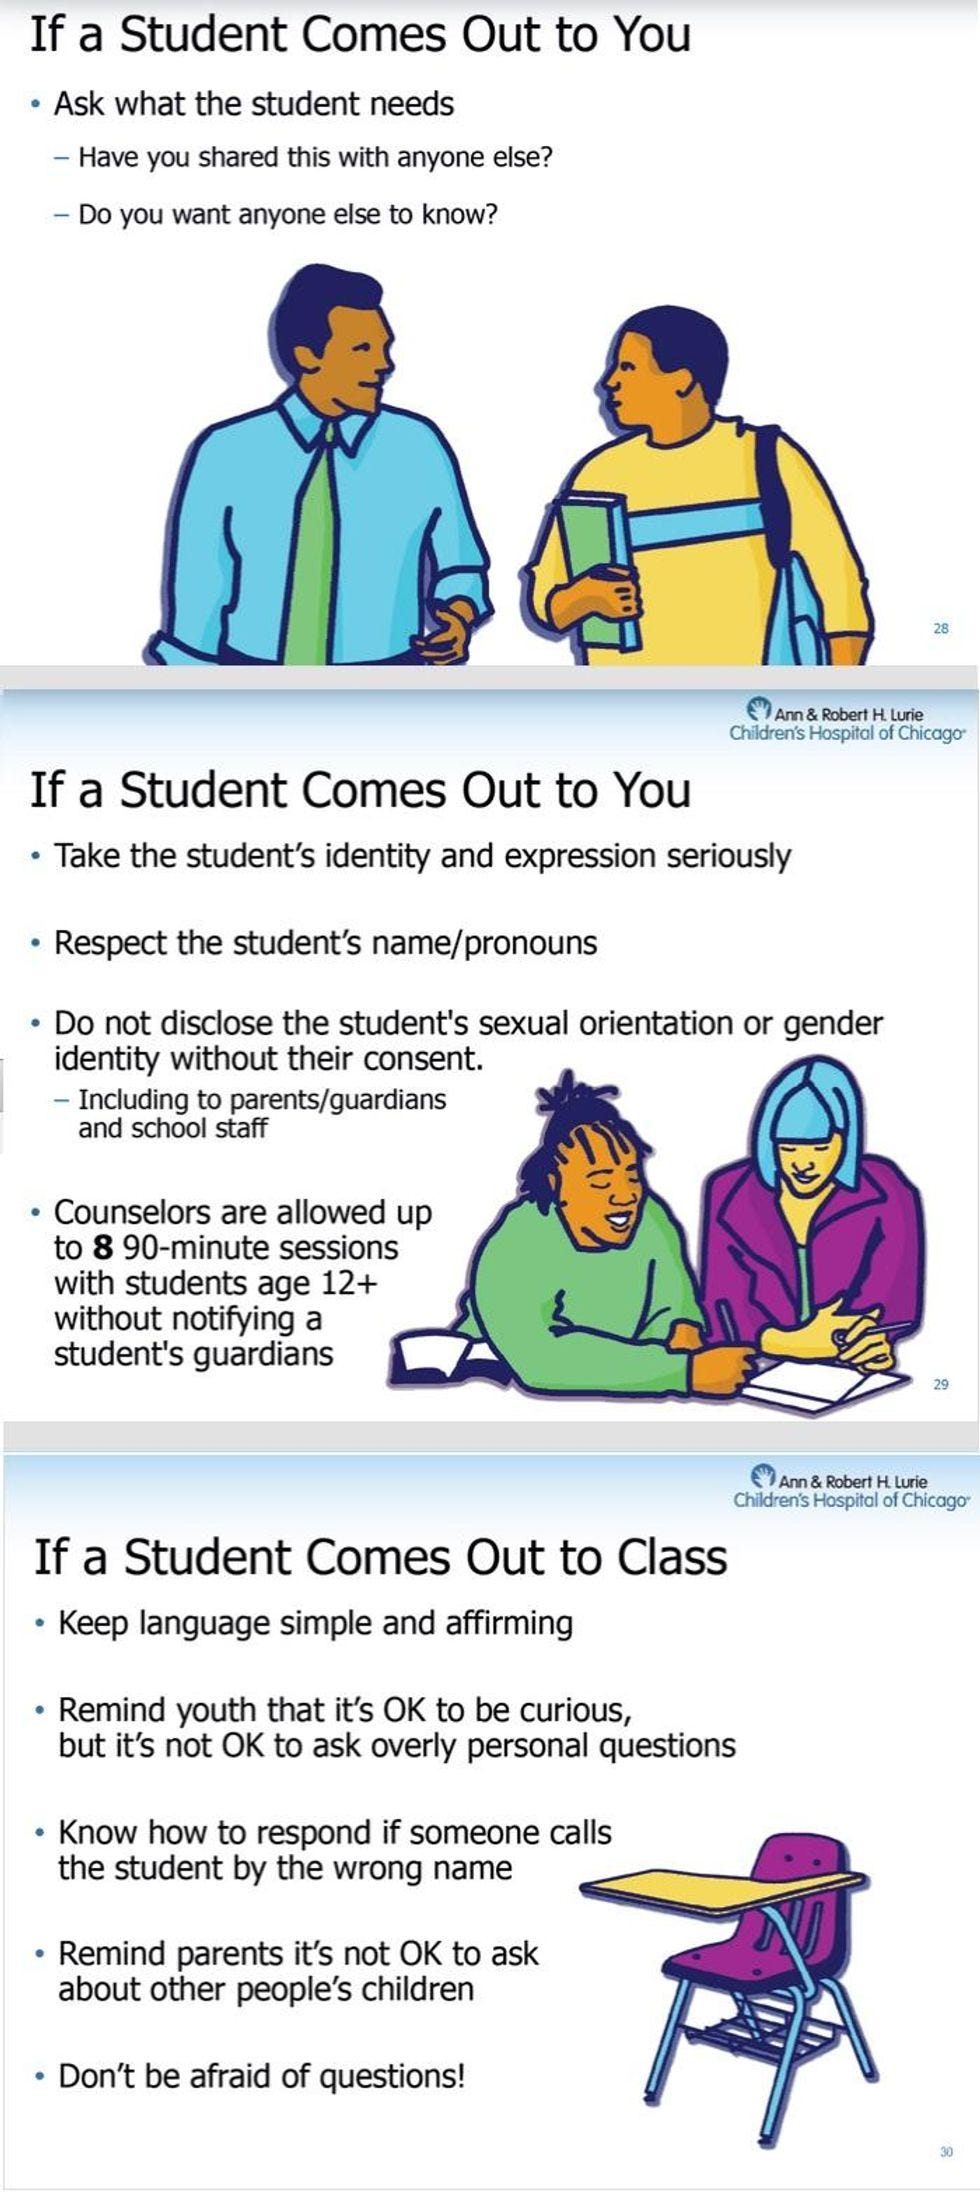 Slideshow excerpts:   If a Student Comes Out to You:  Ask what the student needs  -- Have you shared this with anyone else?  -- Do you want anyone else to know?   If a Student Comes Out to You:  Take the student's identity and expression seriously  -- Respect the student's name/pronouns  -- Do not disclose the student's sexual orientation or gender identity without their consent. Including to parents/guardians and school staff -- Counselors are allowed up to 8 90-minute sessions with students age 12+ without notifying a student's guardian  If a Student Comes Out to Class:  -- Keep language simple and affirming  -- Remind youth that it's OK to be curious, but it's not OK to ask overly personal questions  -- Know how to respond if someone calls the student by the wrong name  -- Remind parents it's not OK to ask about other people's children  -- Don't be afraid of questions! 